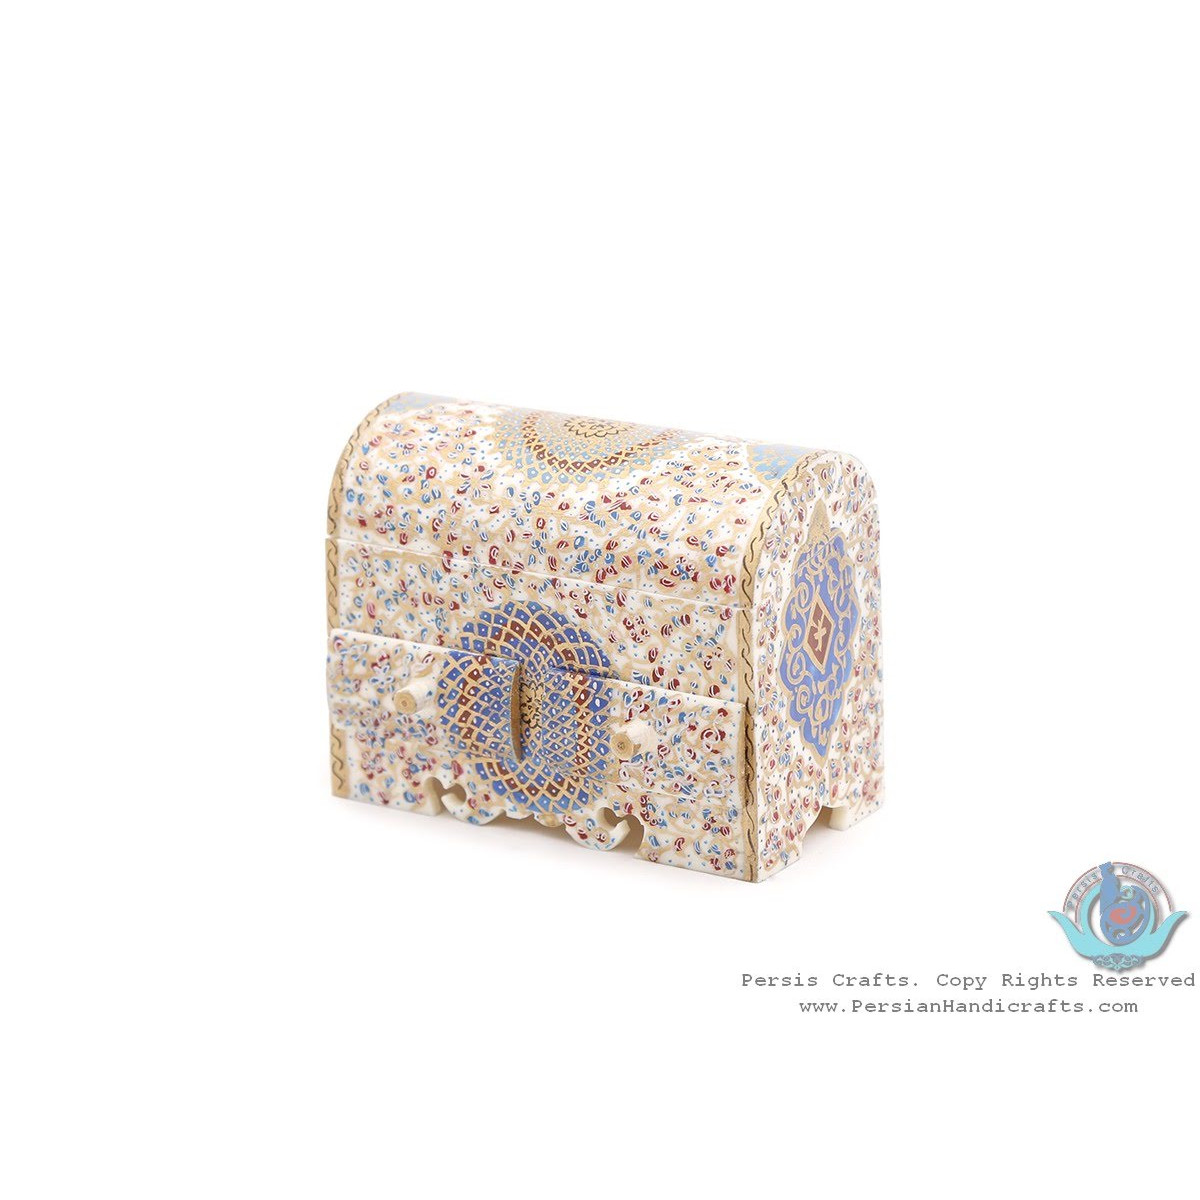 Tazhib Miniature Jewelry Box with 4 Storages - HM3902-Persian Handicrafts